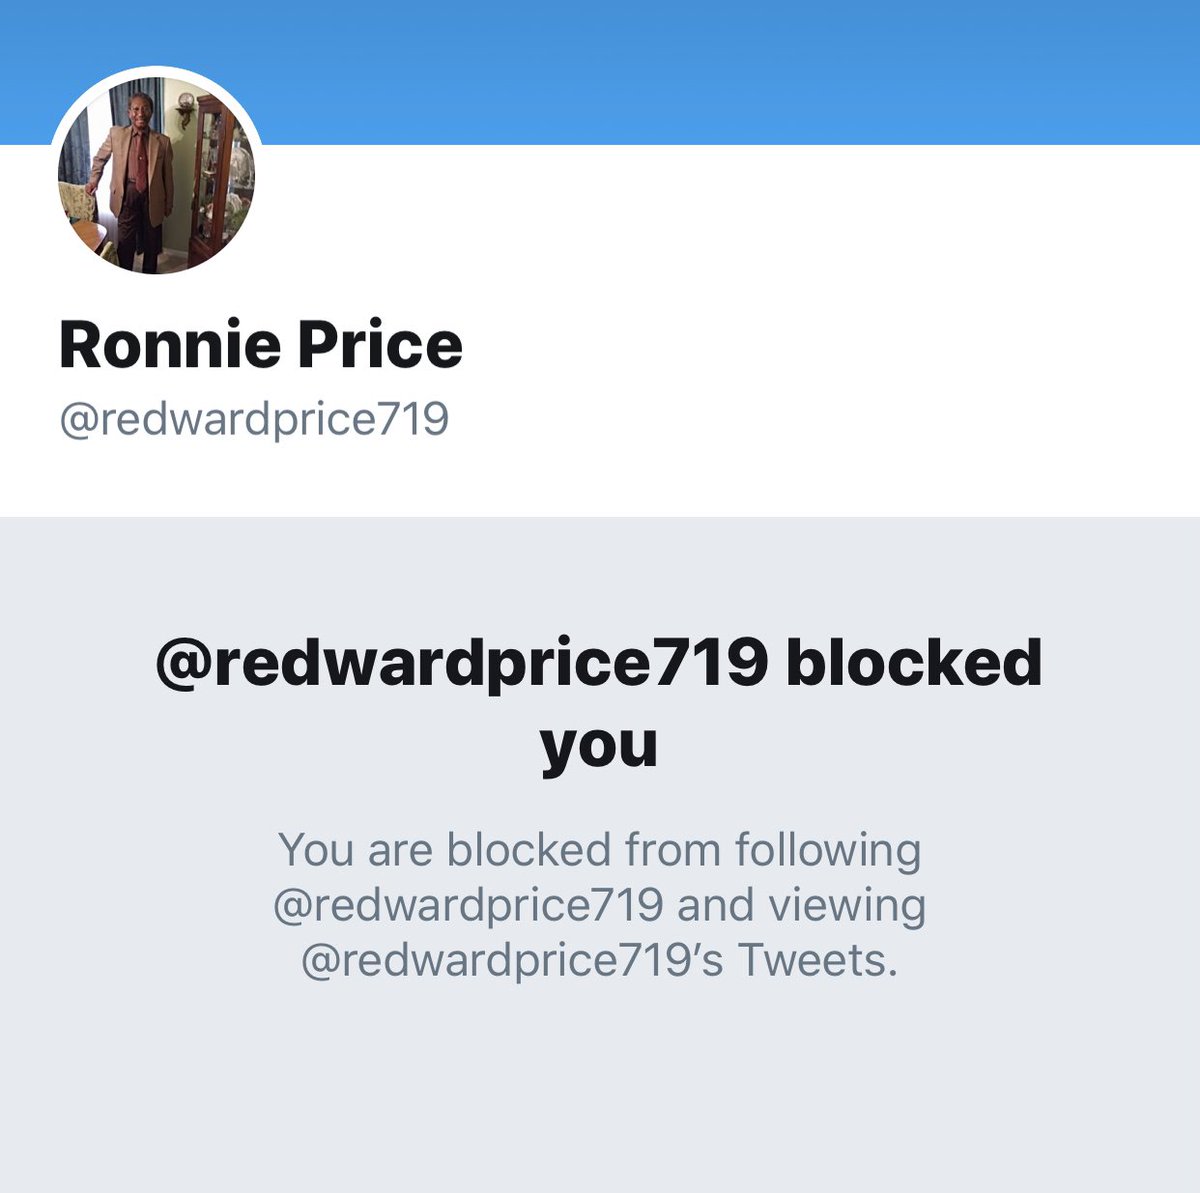 Shoutout to Ronnie who was INCREDIBLY offended. Mea culpa, Ronnie.